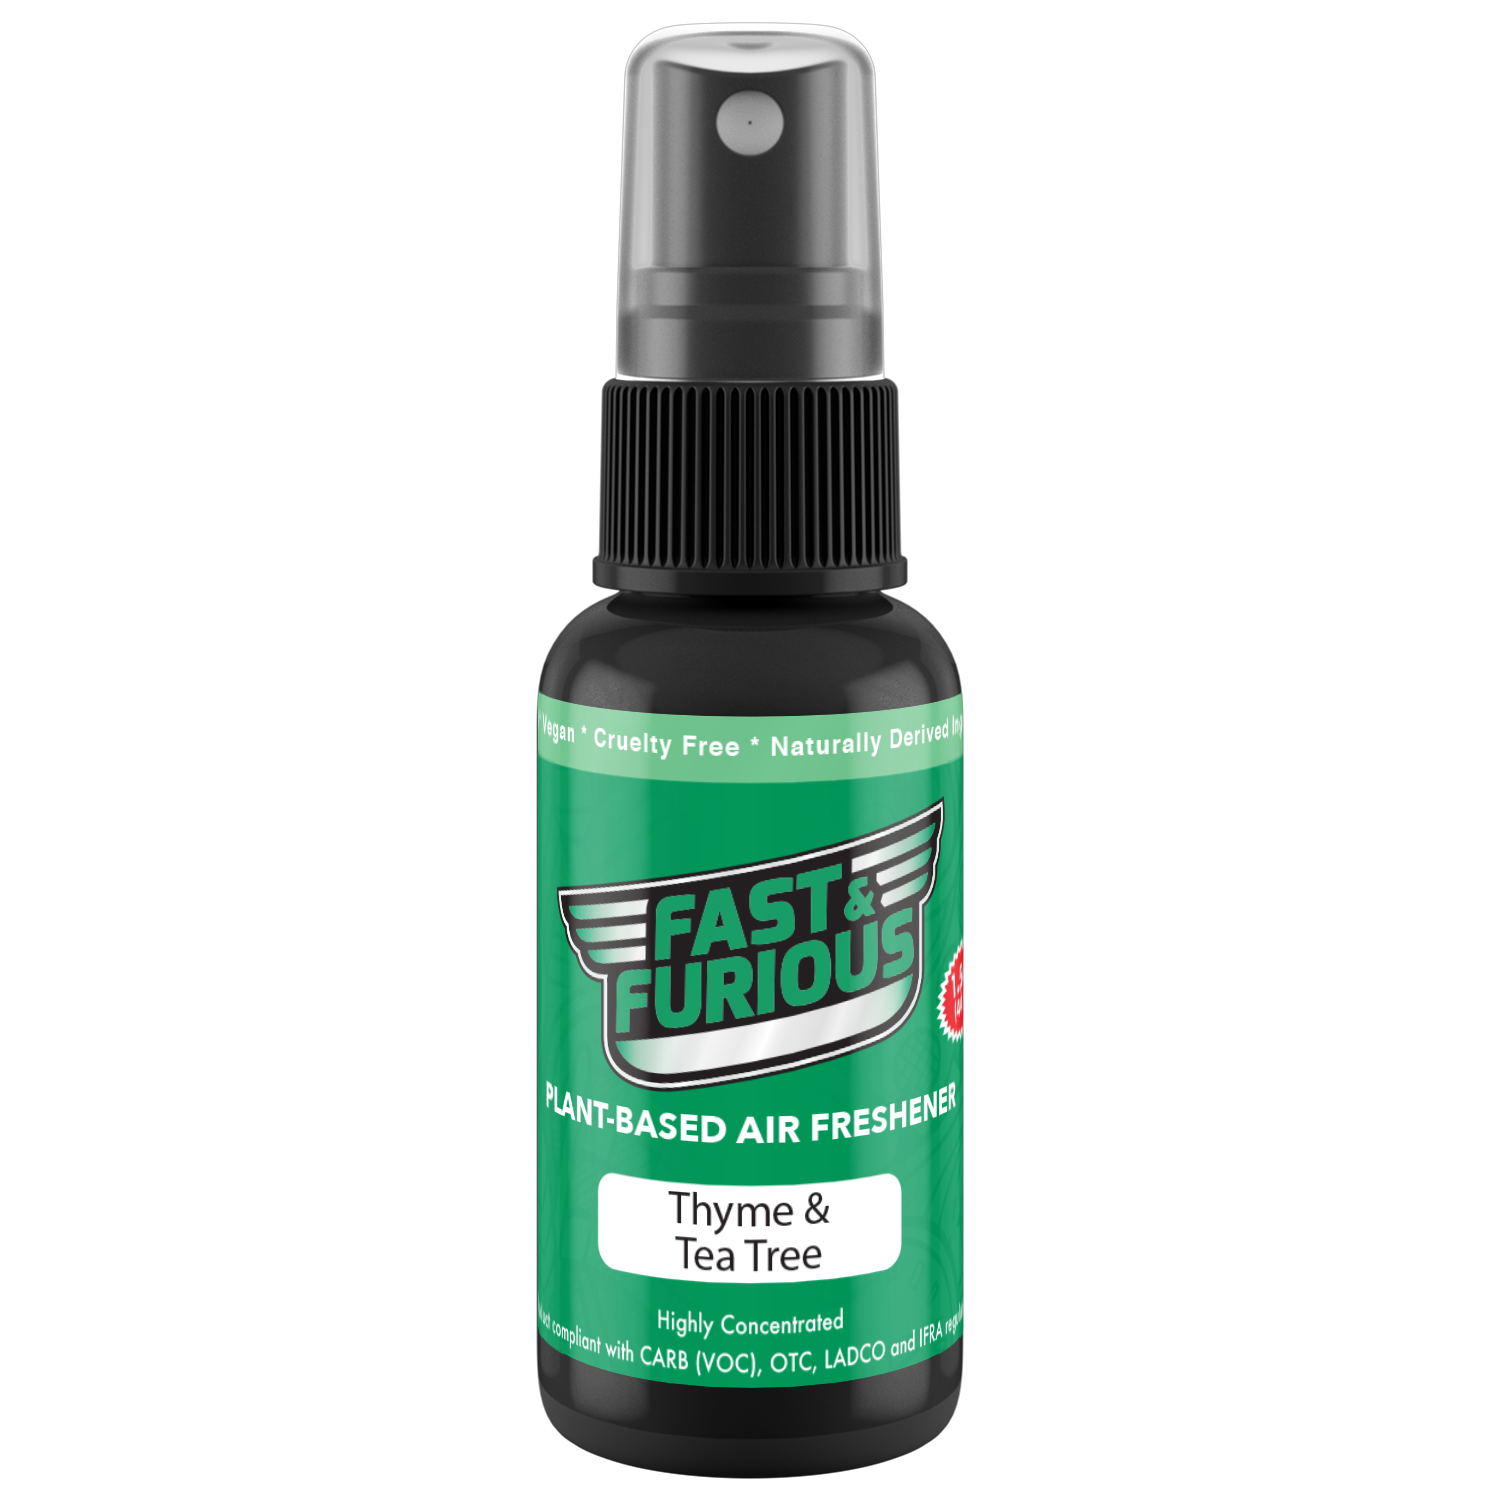 Fast and Furious Plant-Based Air Freshener - Thyme & Tea Tree Scent